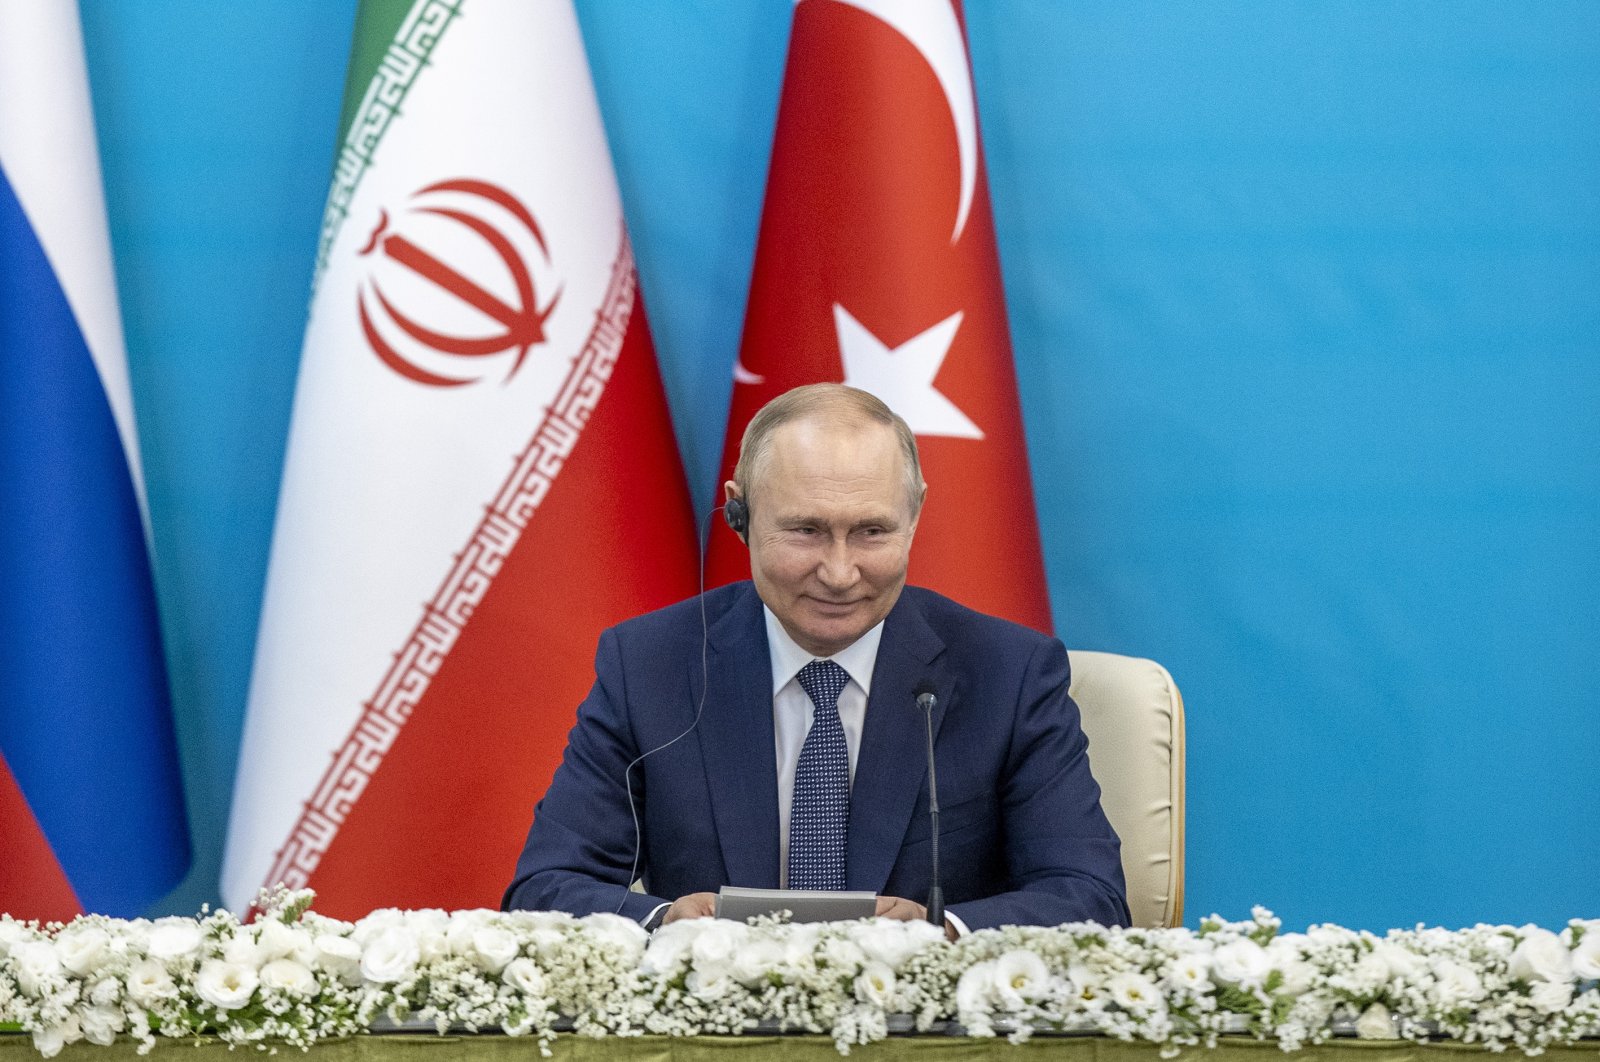 Russian President Vladimir Putin at a joint press conference with his Turkish and Iranian counterparts following the trilateral summit in Tehran, Iran, July 19, 2022. (AA Photo)